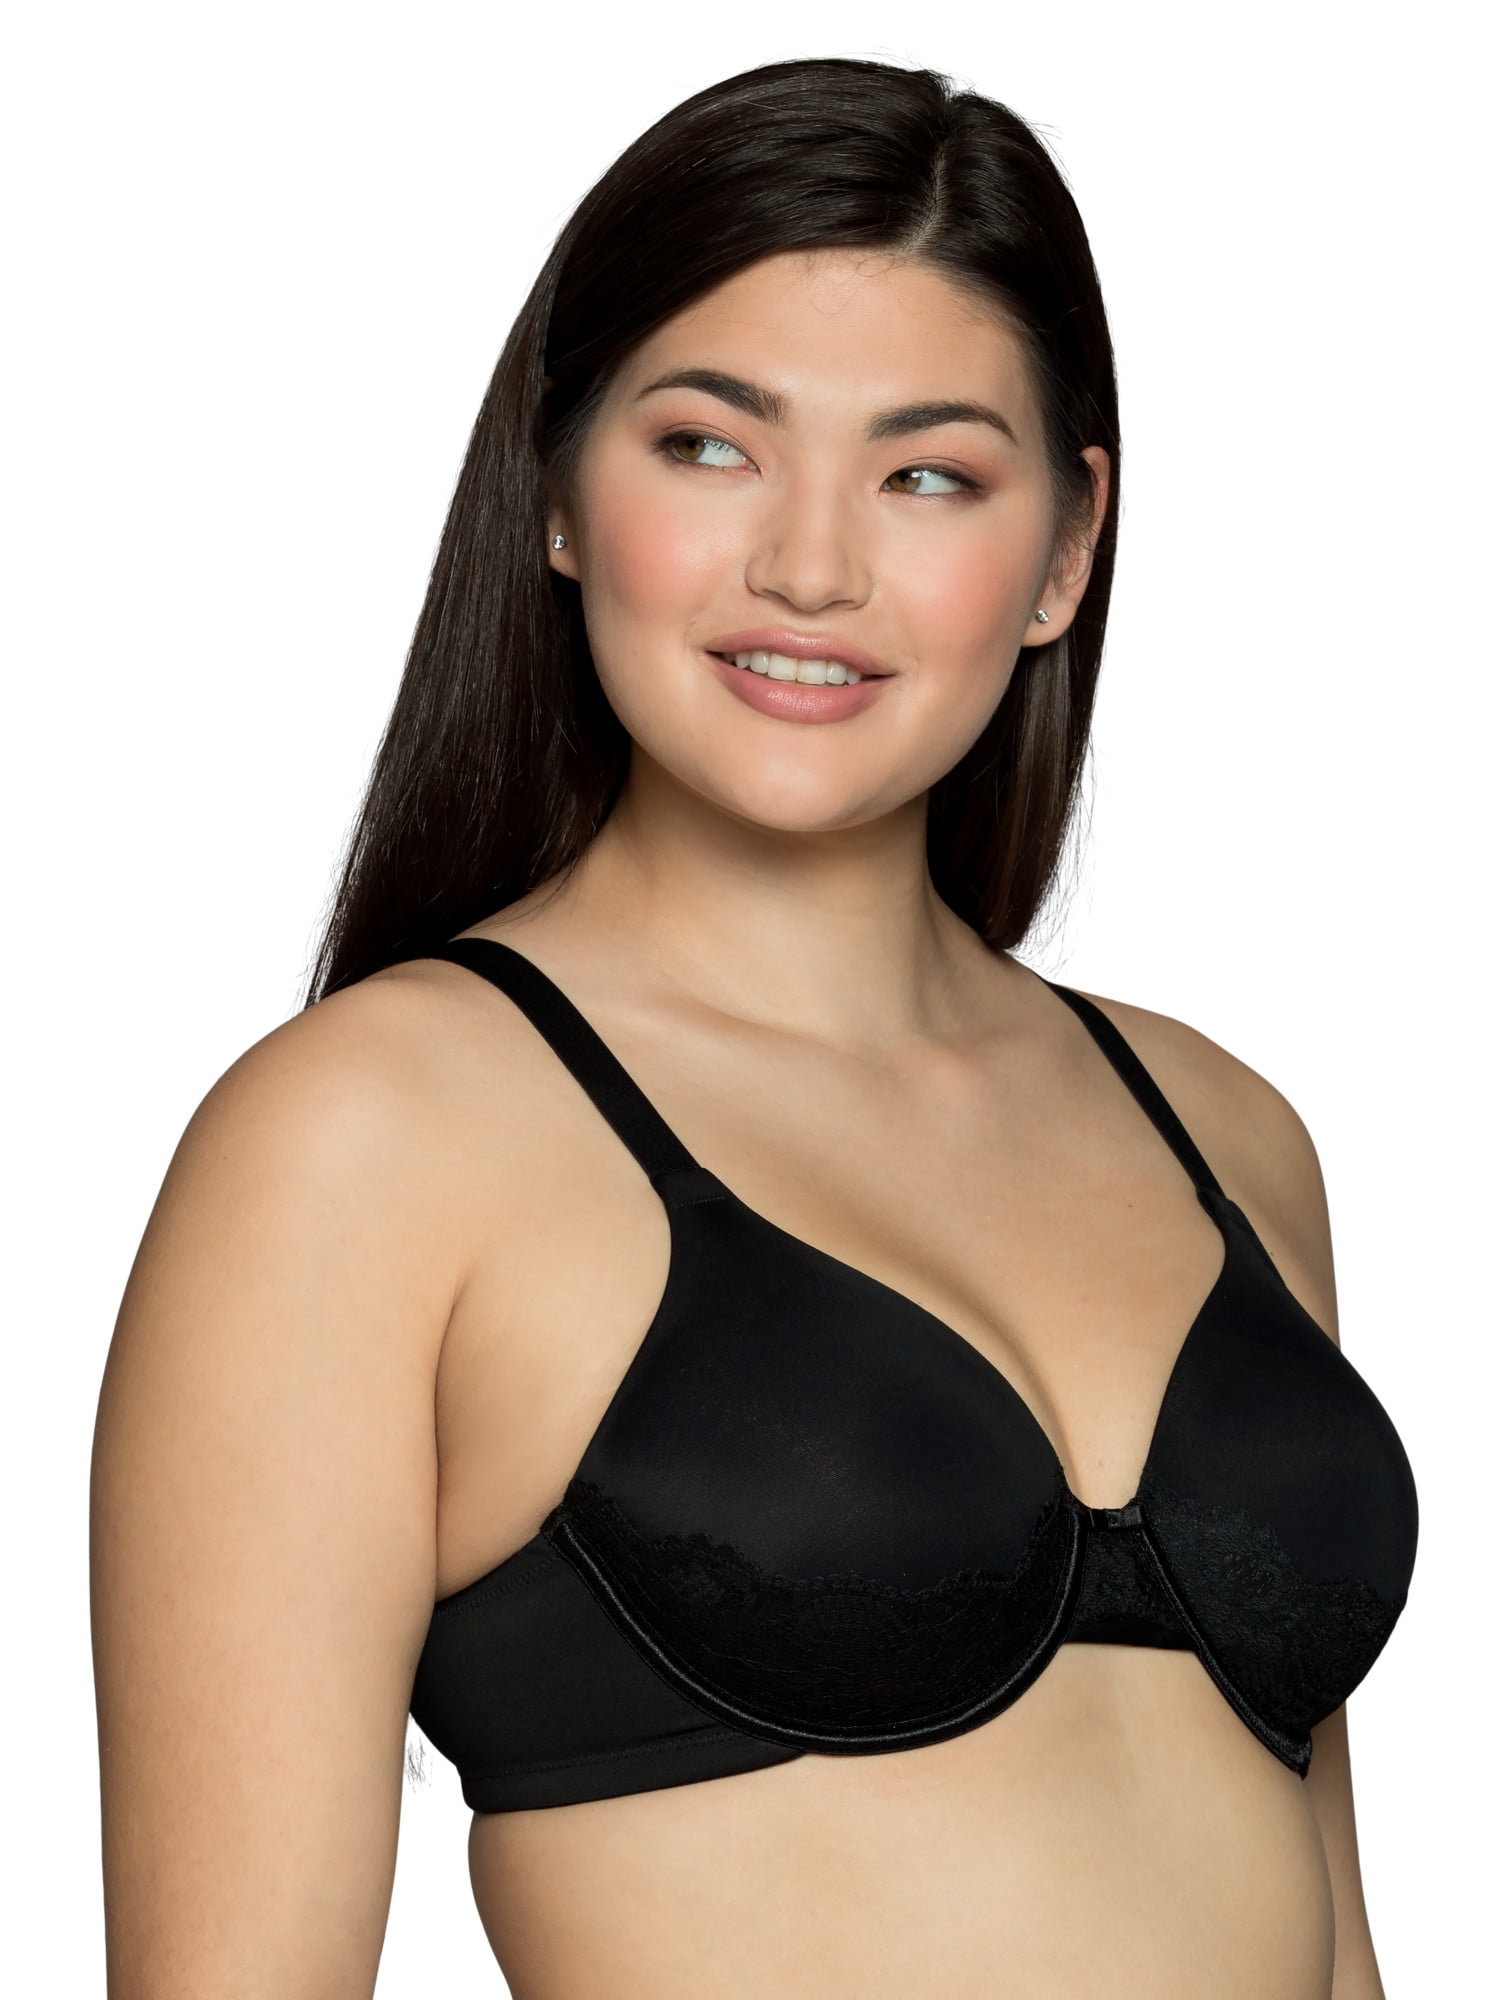 Buy Vanity Fair Women's Beauty Back Lace Full Figure Underwire Bra 76382,Toasted  Coconut,36C at